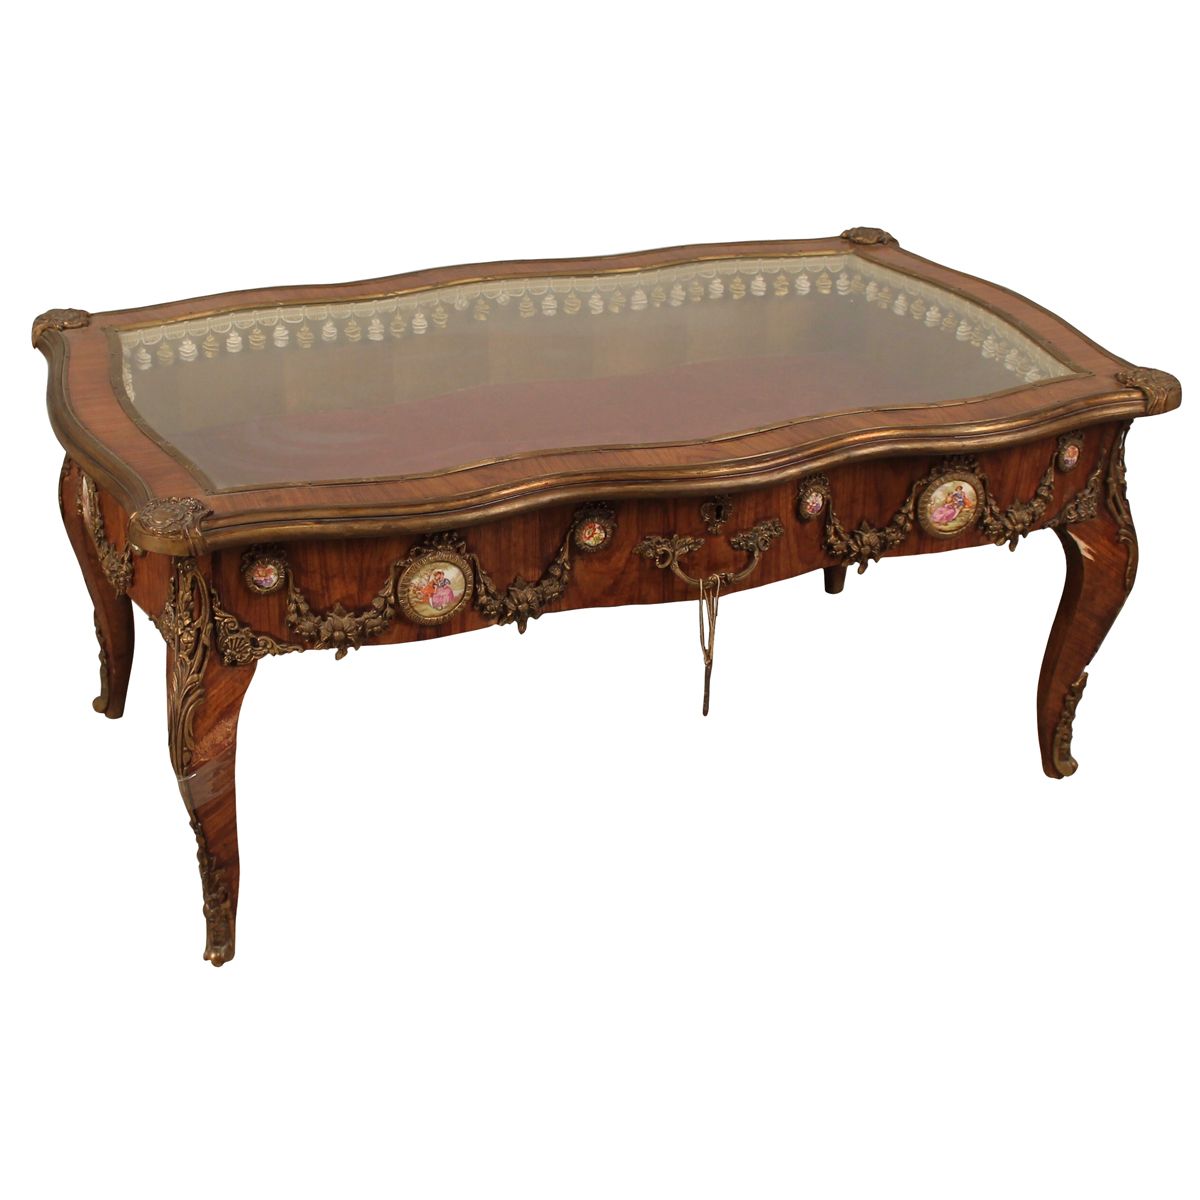 TAVOLO BASSO A BACHECA - SMALL SHOWCASE TABLE Rosewood with polychrome porcelain&hellip;